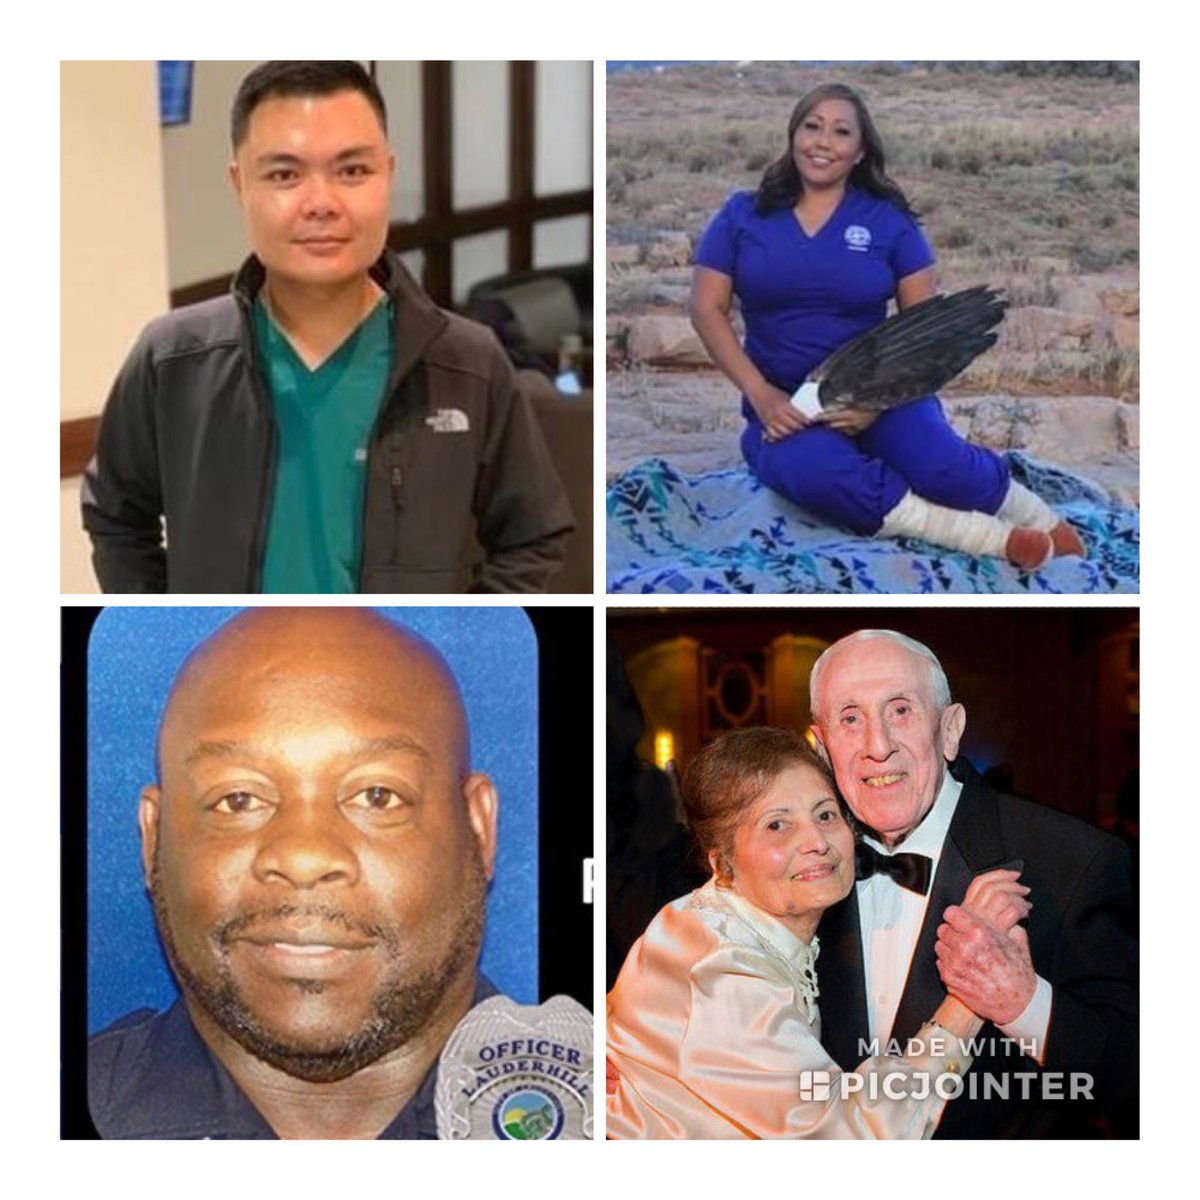 As the nation surpasses 150 thousand coronavirus deaths, some of those lost, Texas medical student Don Galinea-Faigao; Arizona Navajo Nation nurse Shawna Johnson; Florida Police Officer Corey Pendergrass; Horace & Violent Saunders, who died days apart in Maryland. RIP all.